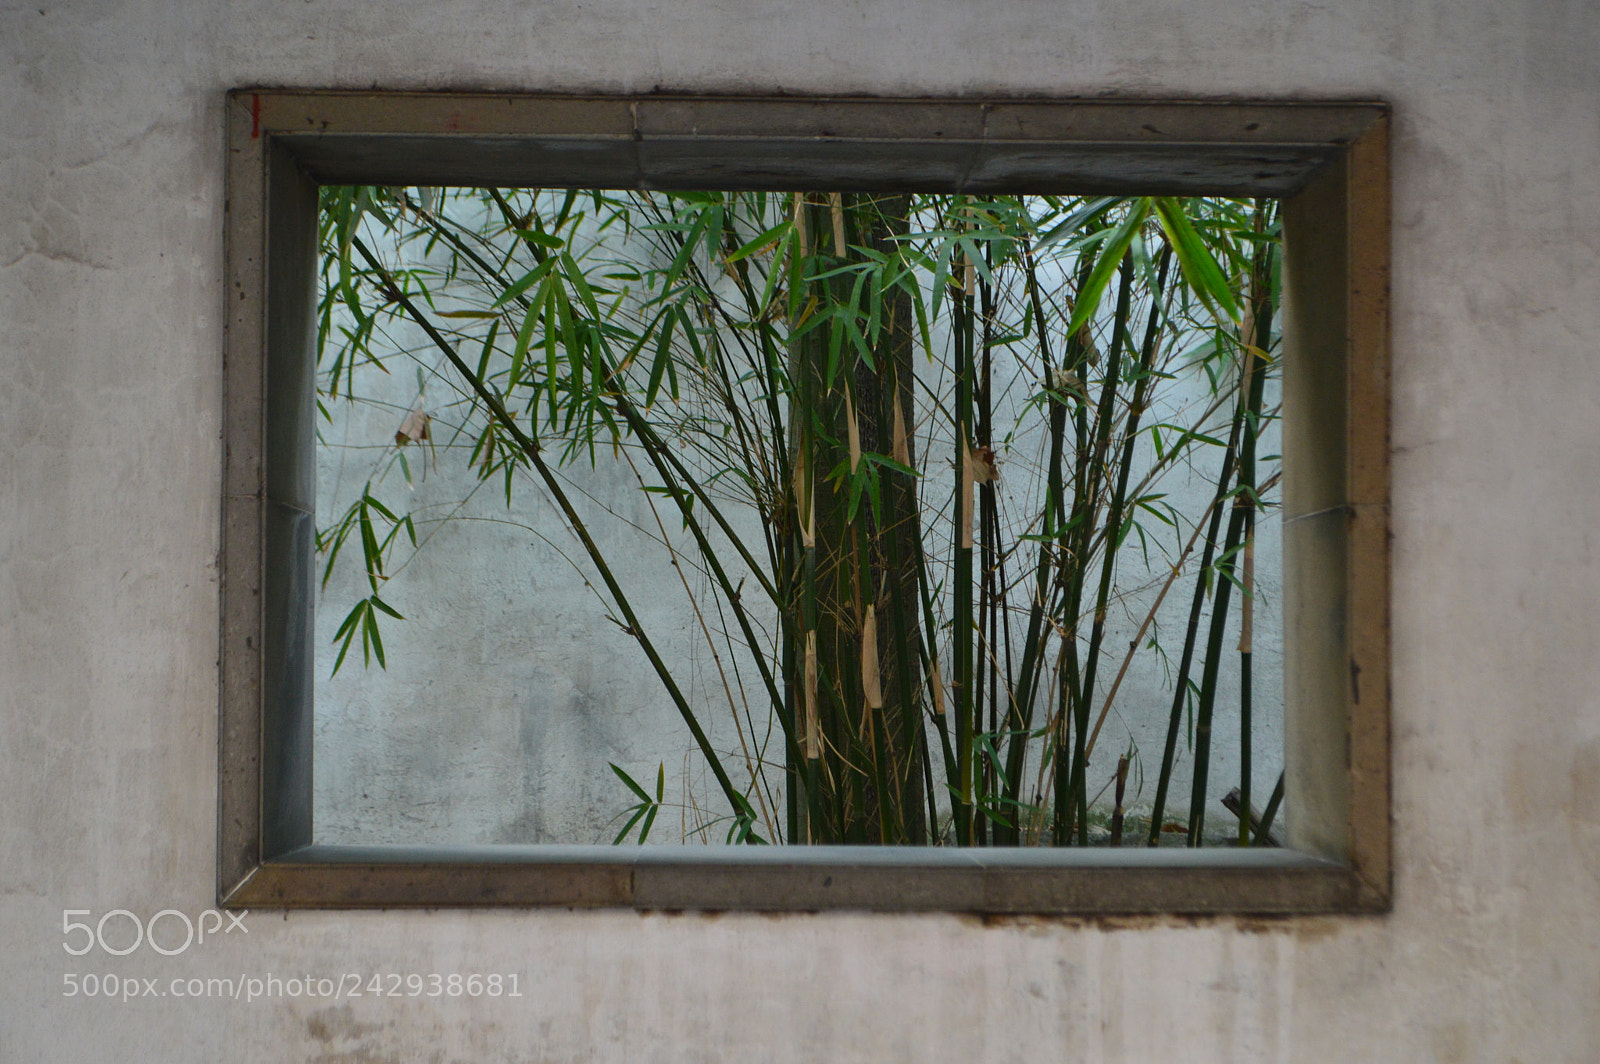 Nikon D3200 sample photo. A window to the photography